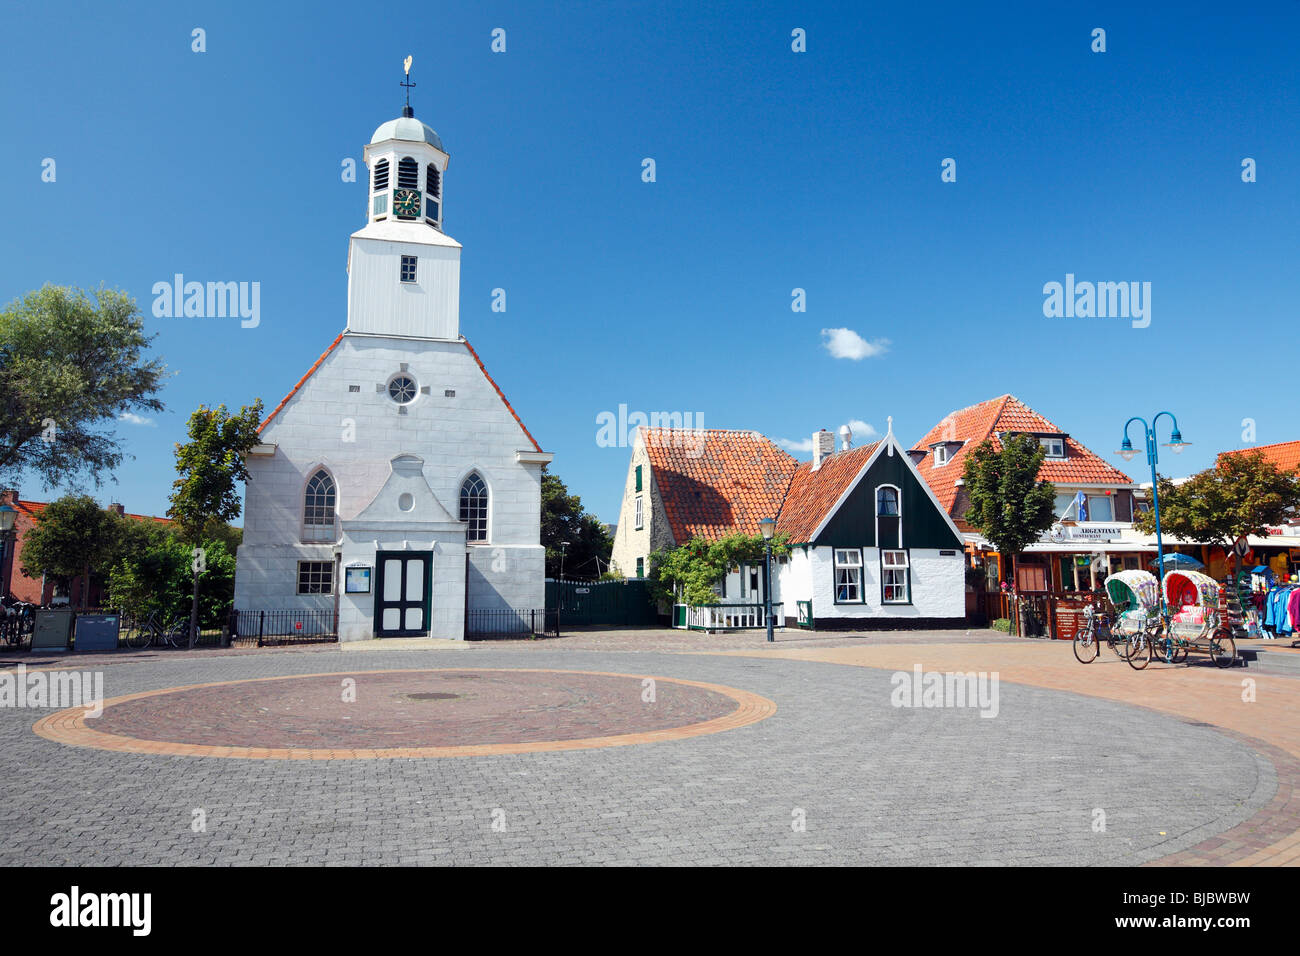 Traditional Buildings and market place, De Koog, Texel Island, Holland Stock Photo